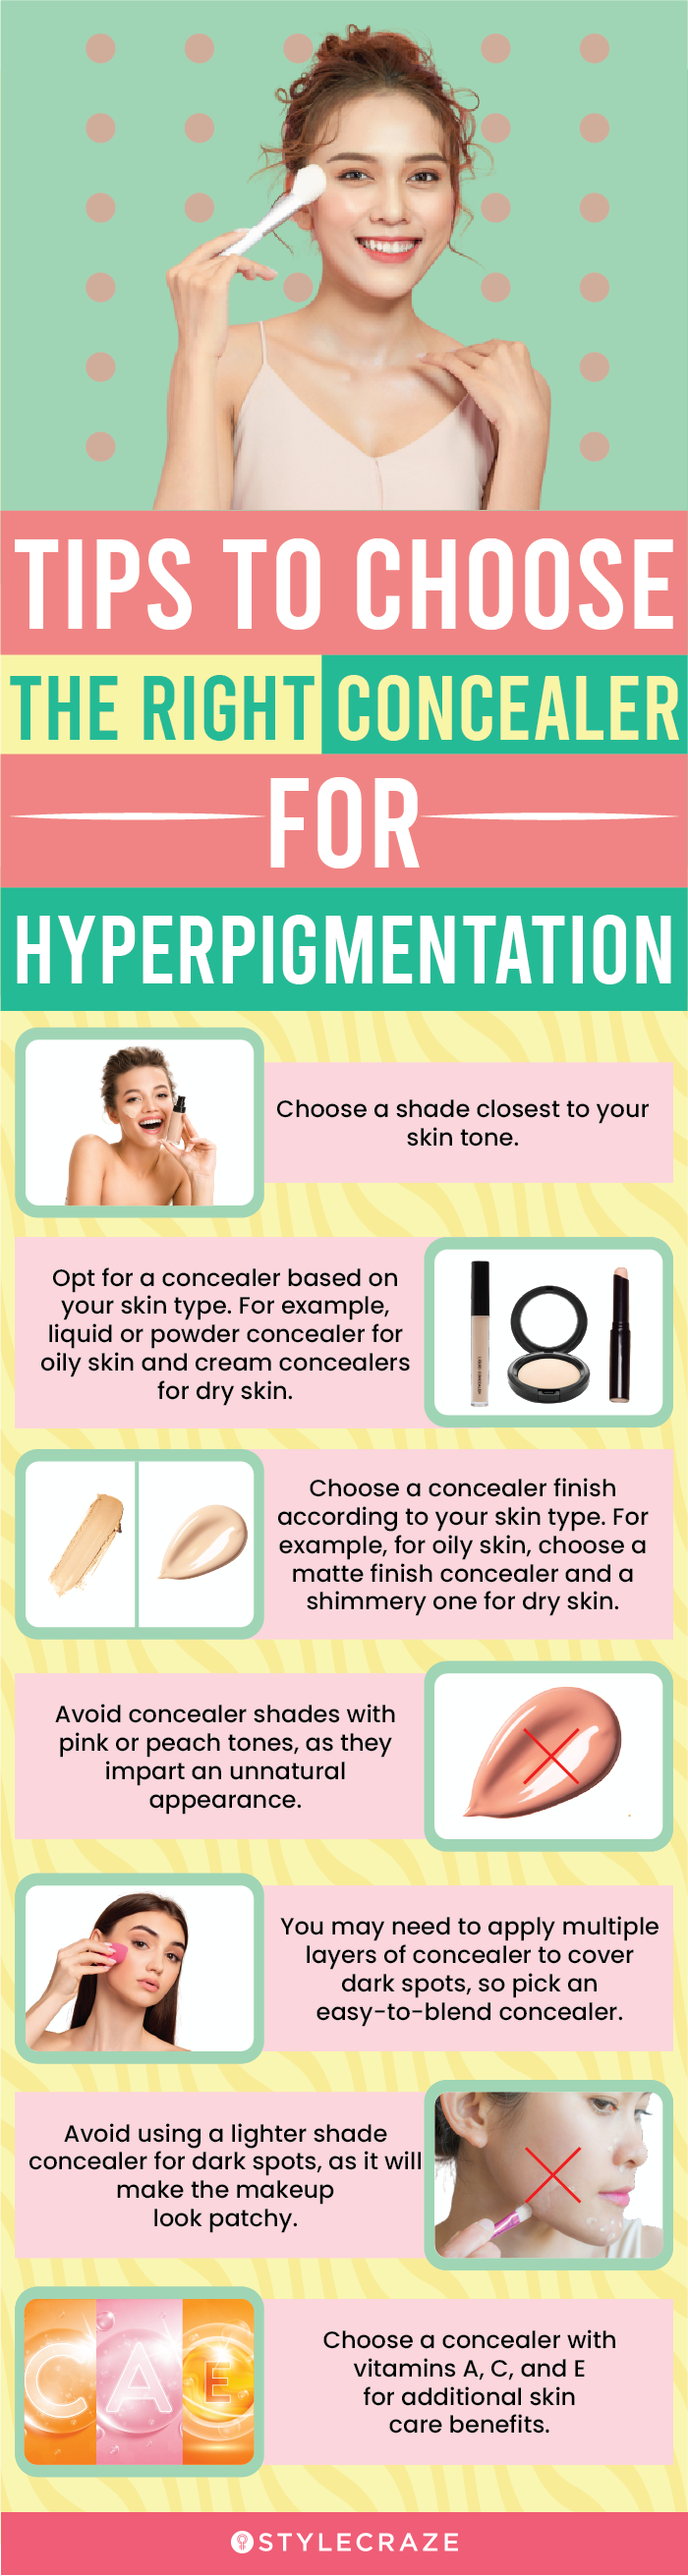 Tips To Choose The Right Concealer For Hyperpigmentation (infographic)